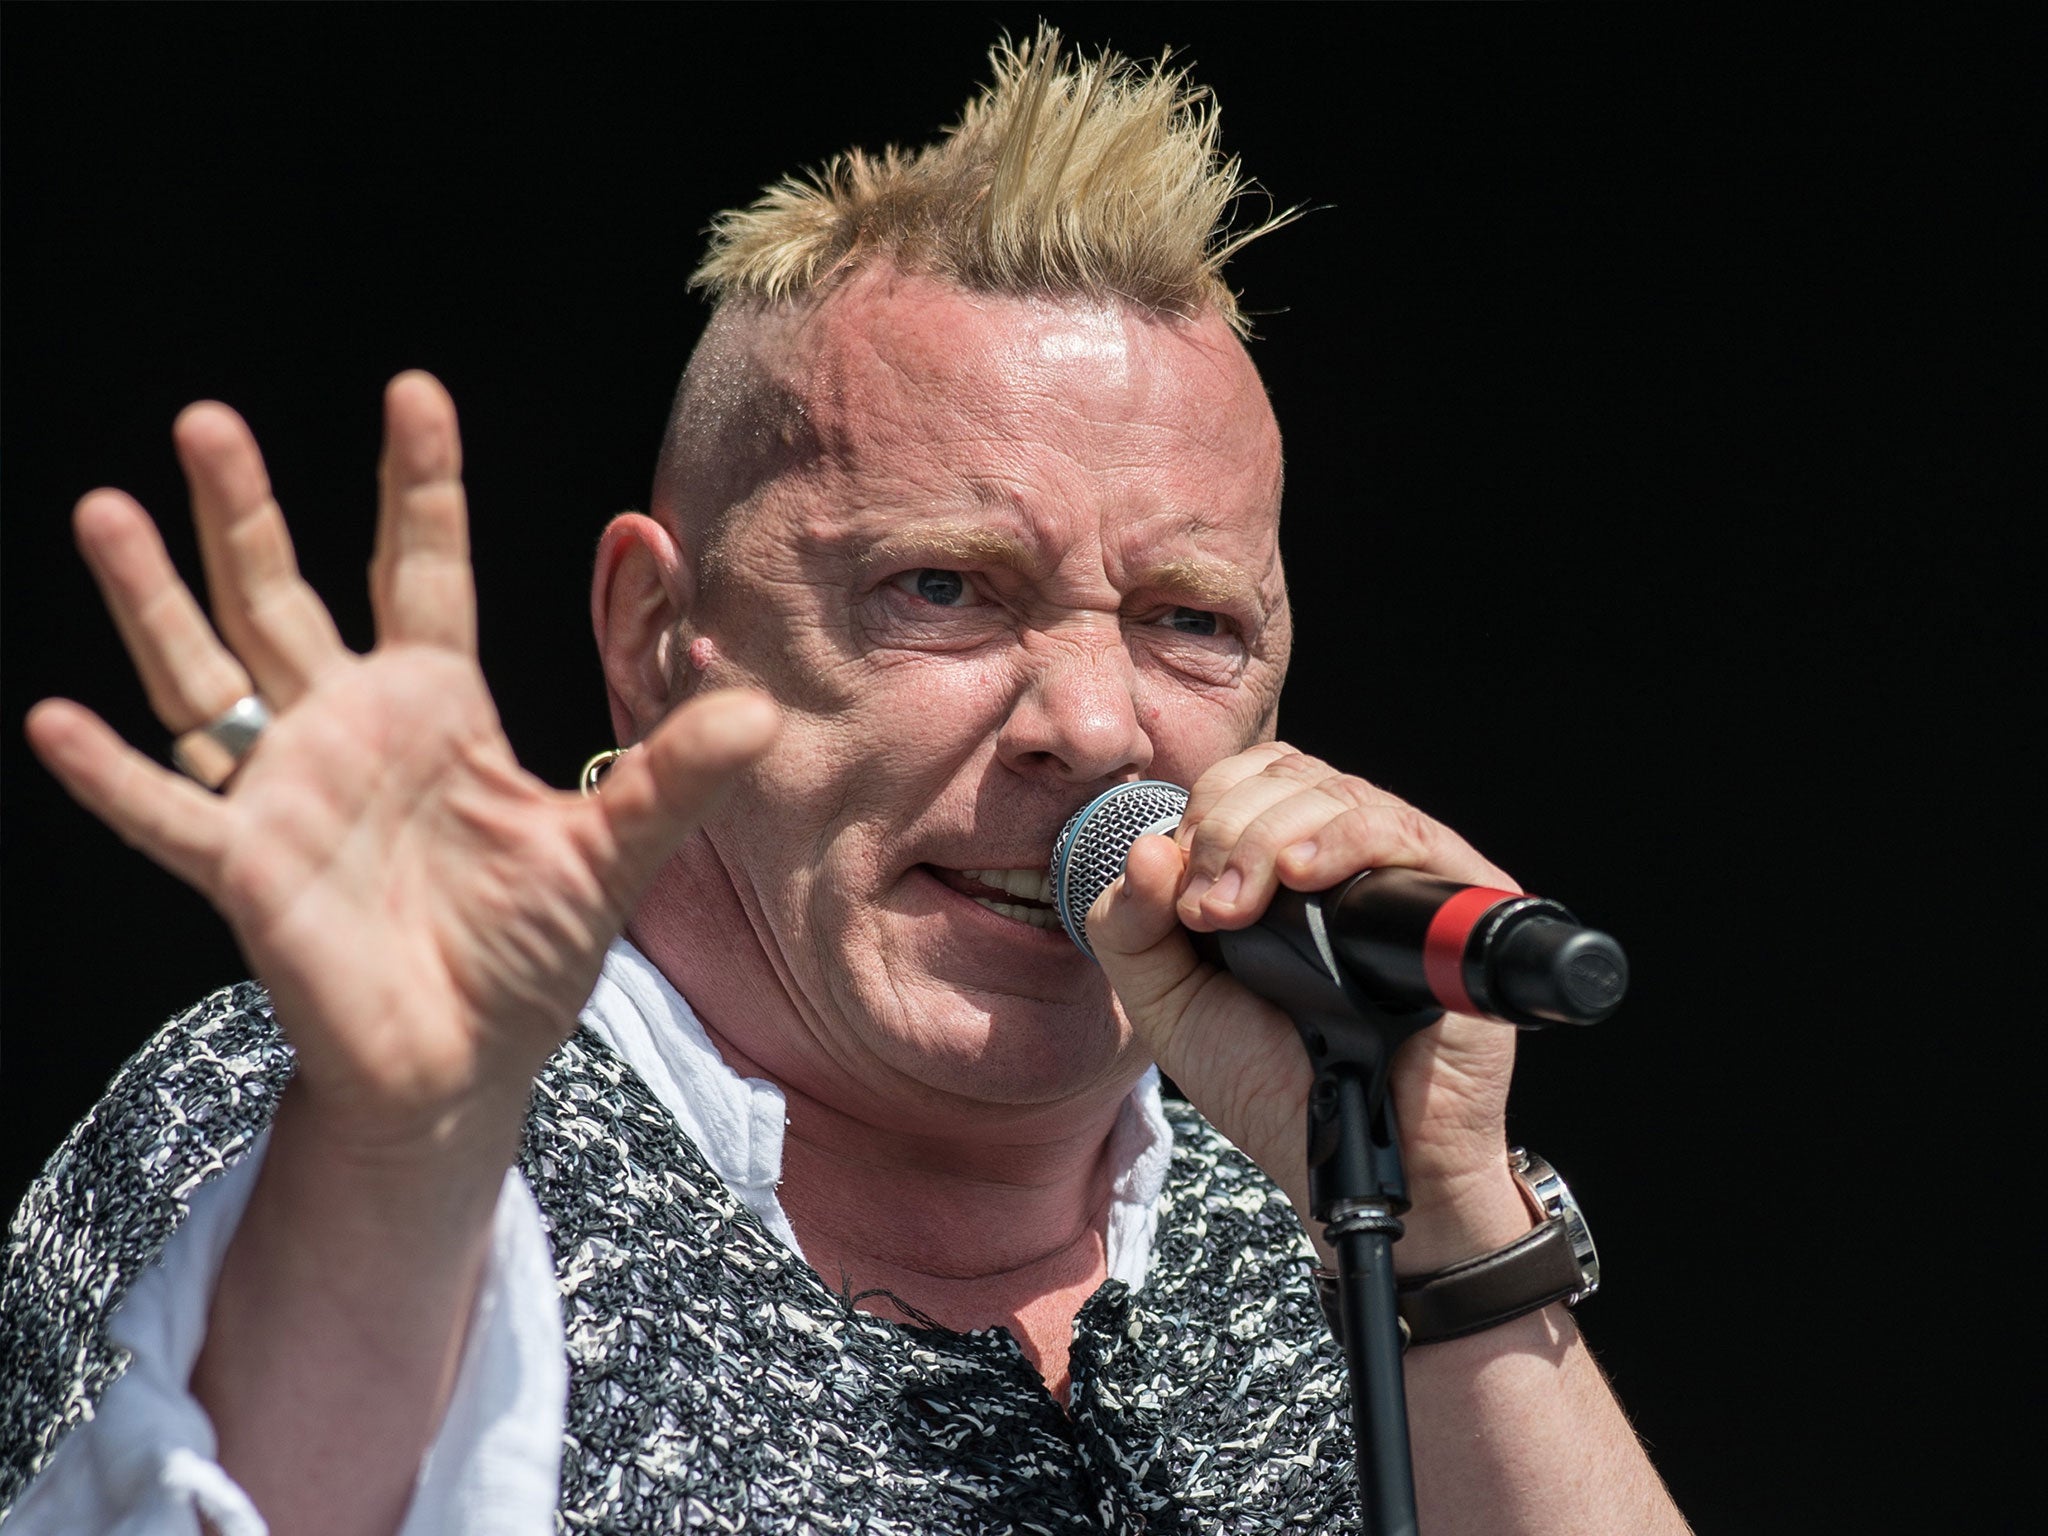 Sex Pistols John Lydon Comes Out In Support Of Trump Brexit And Nigel Farage The Independent